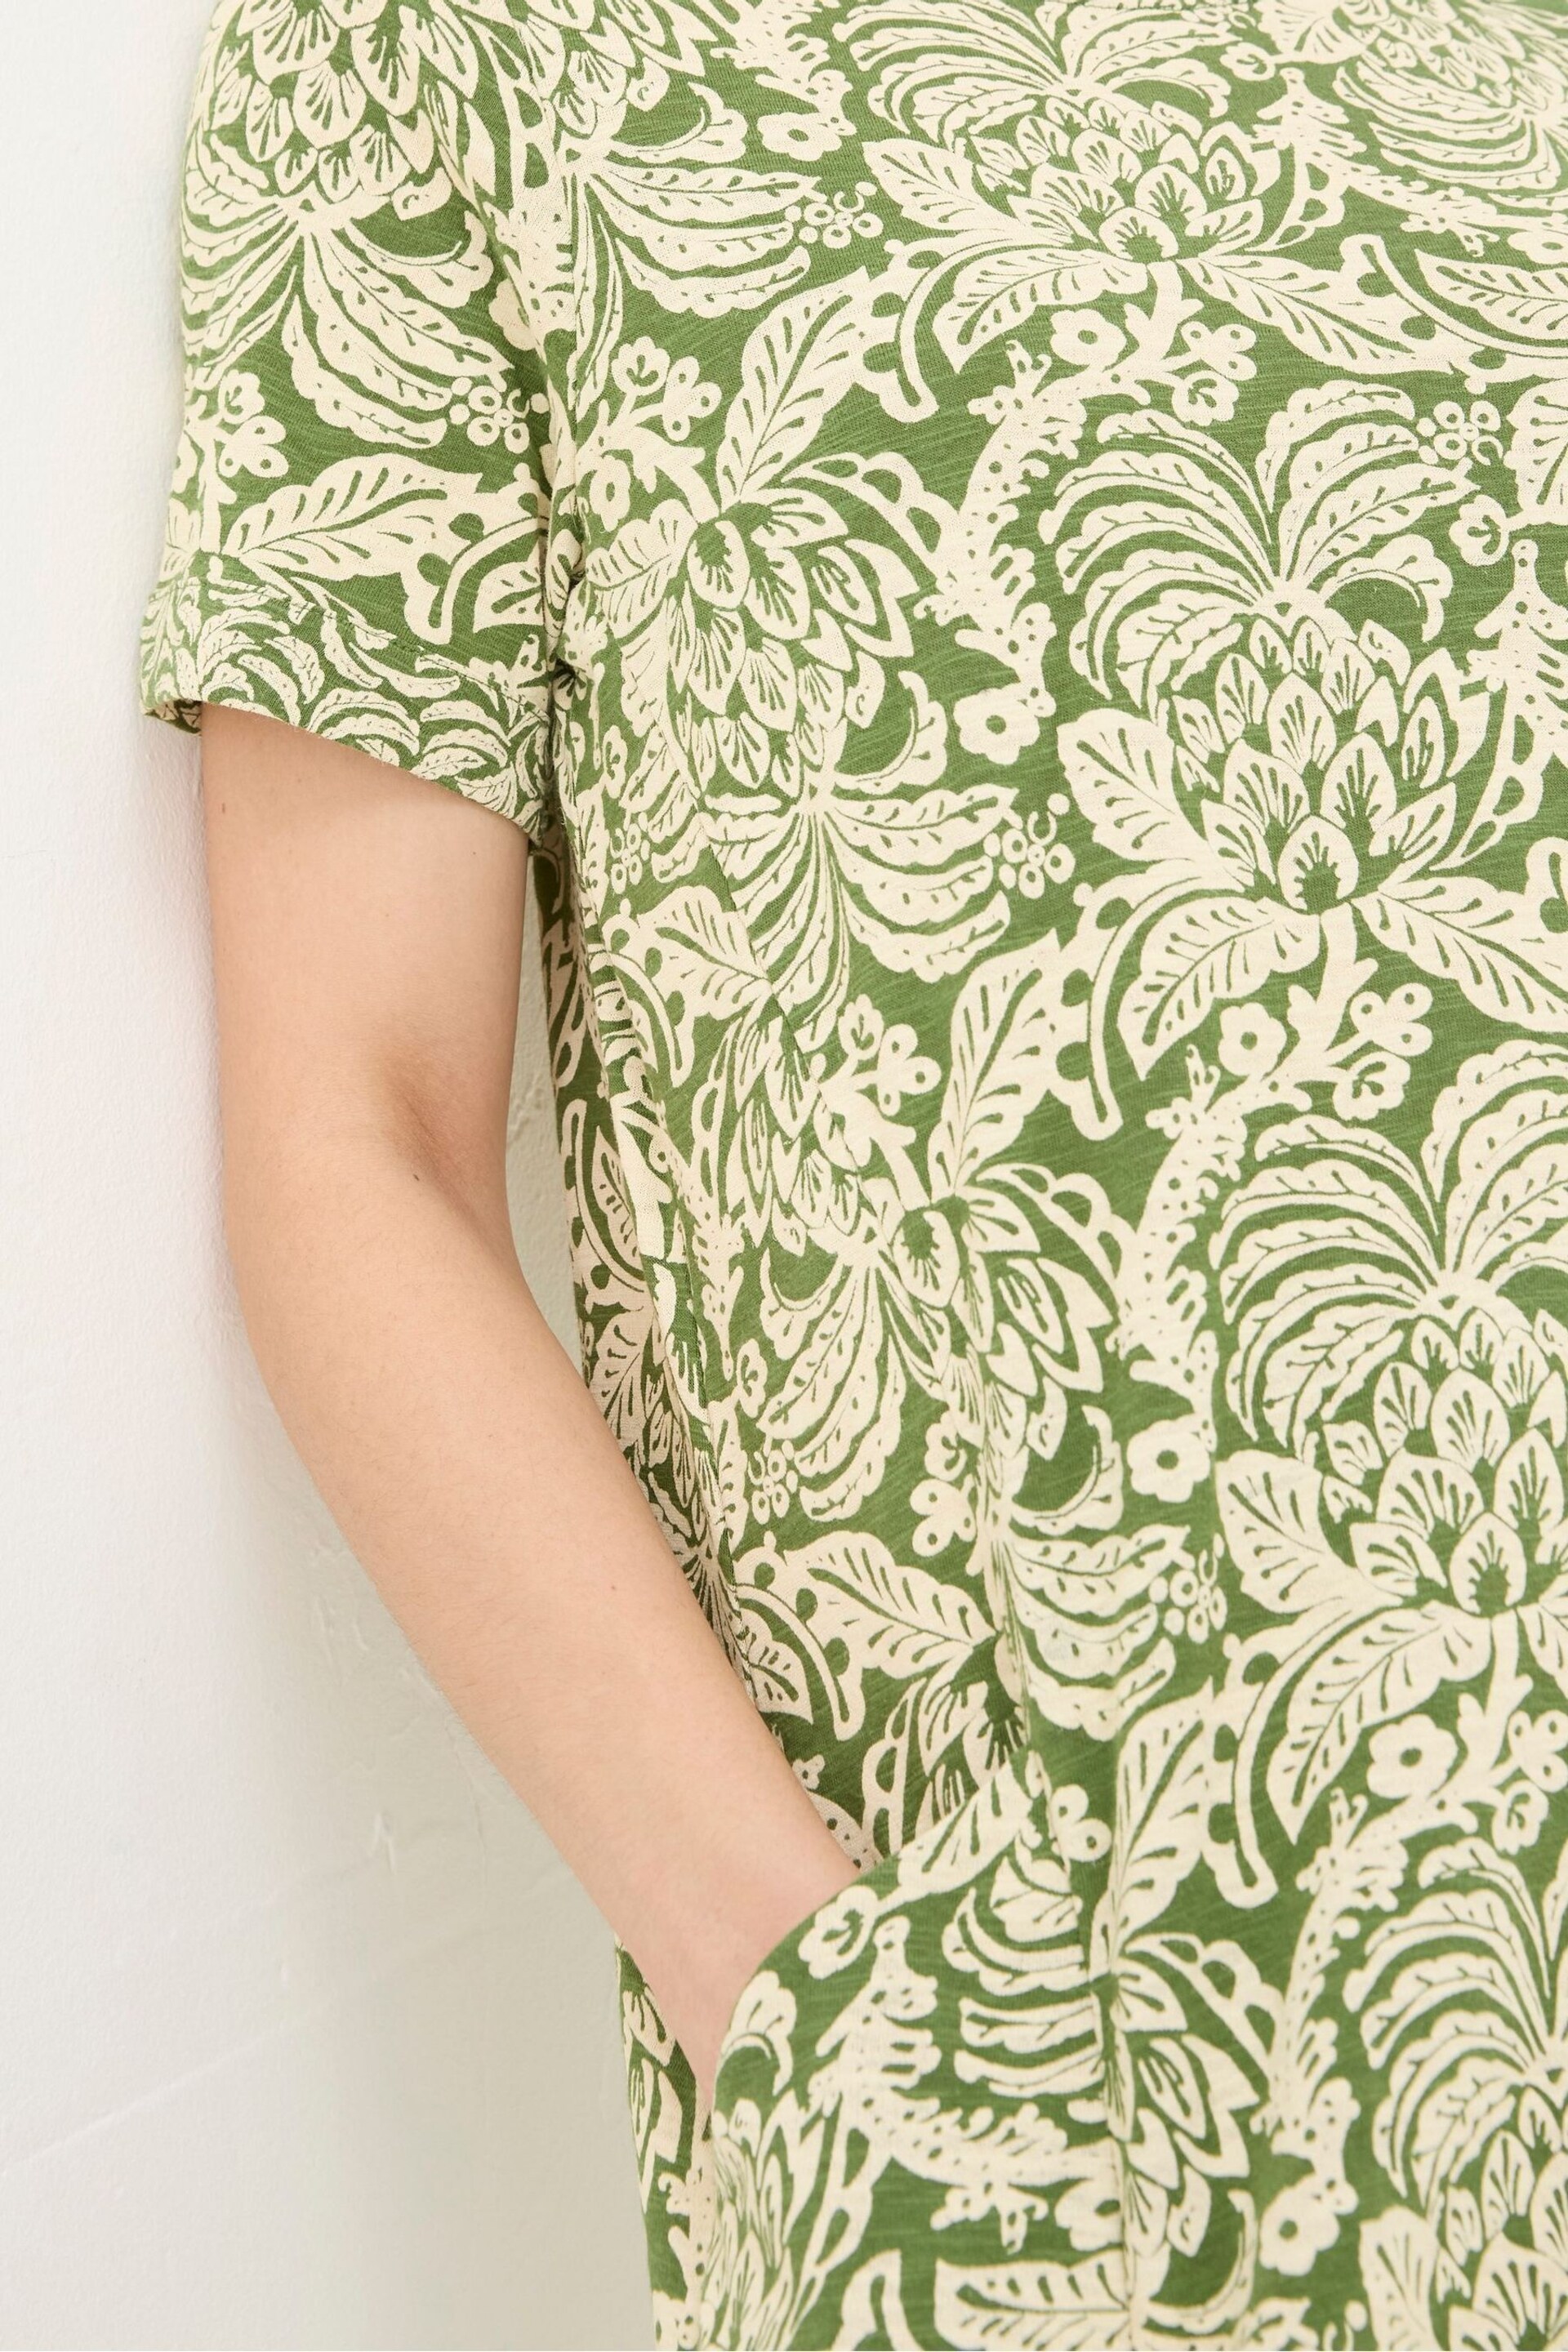 FatFace Green Simone Damask Floral Jersey Dress - Image 5 of 6